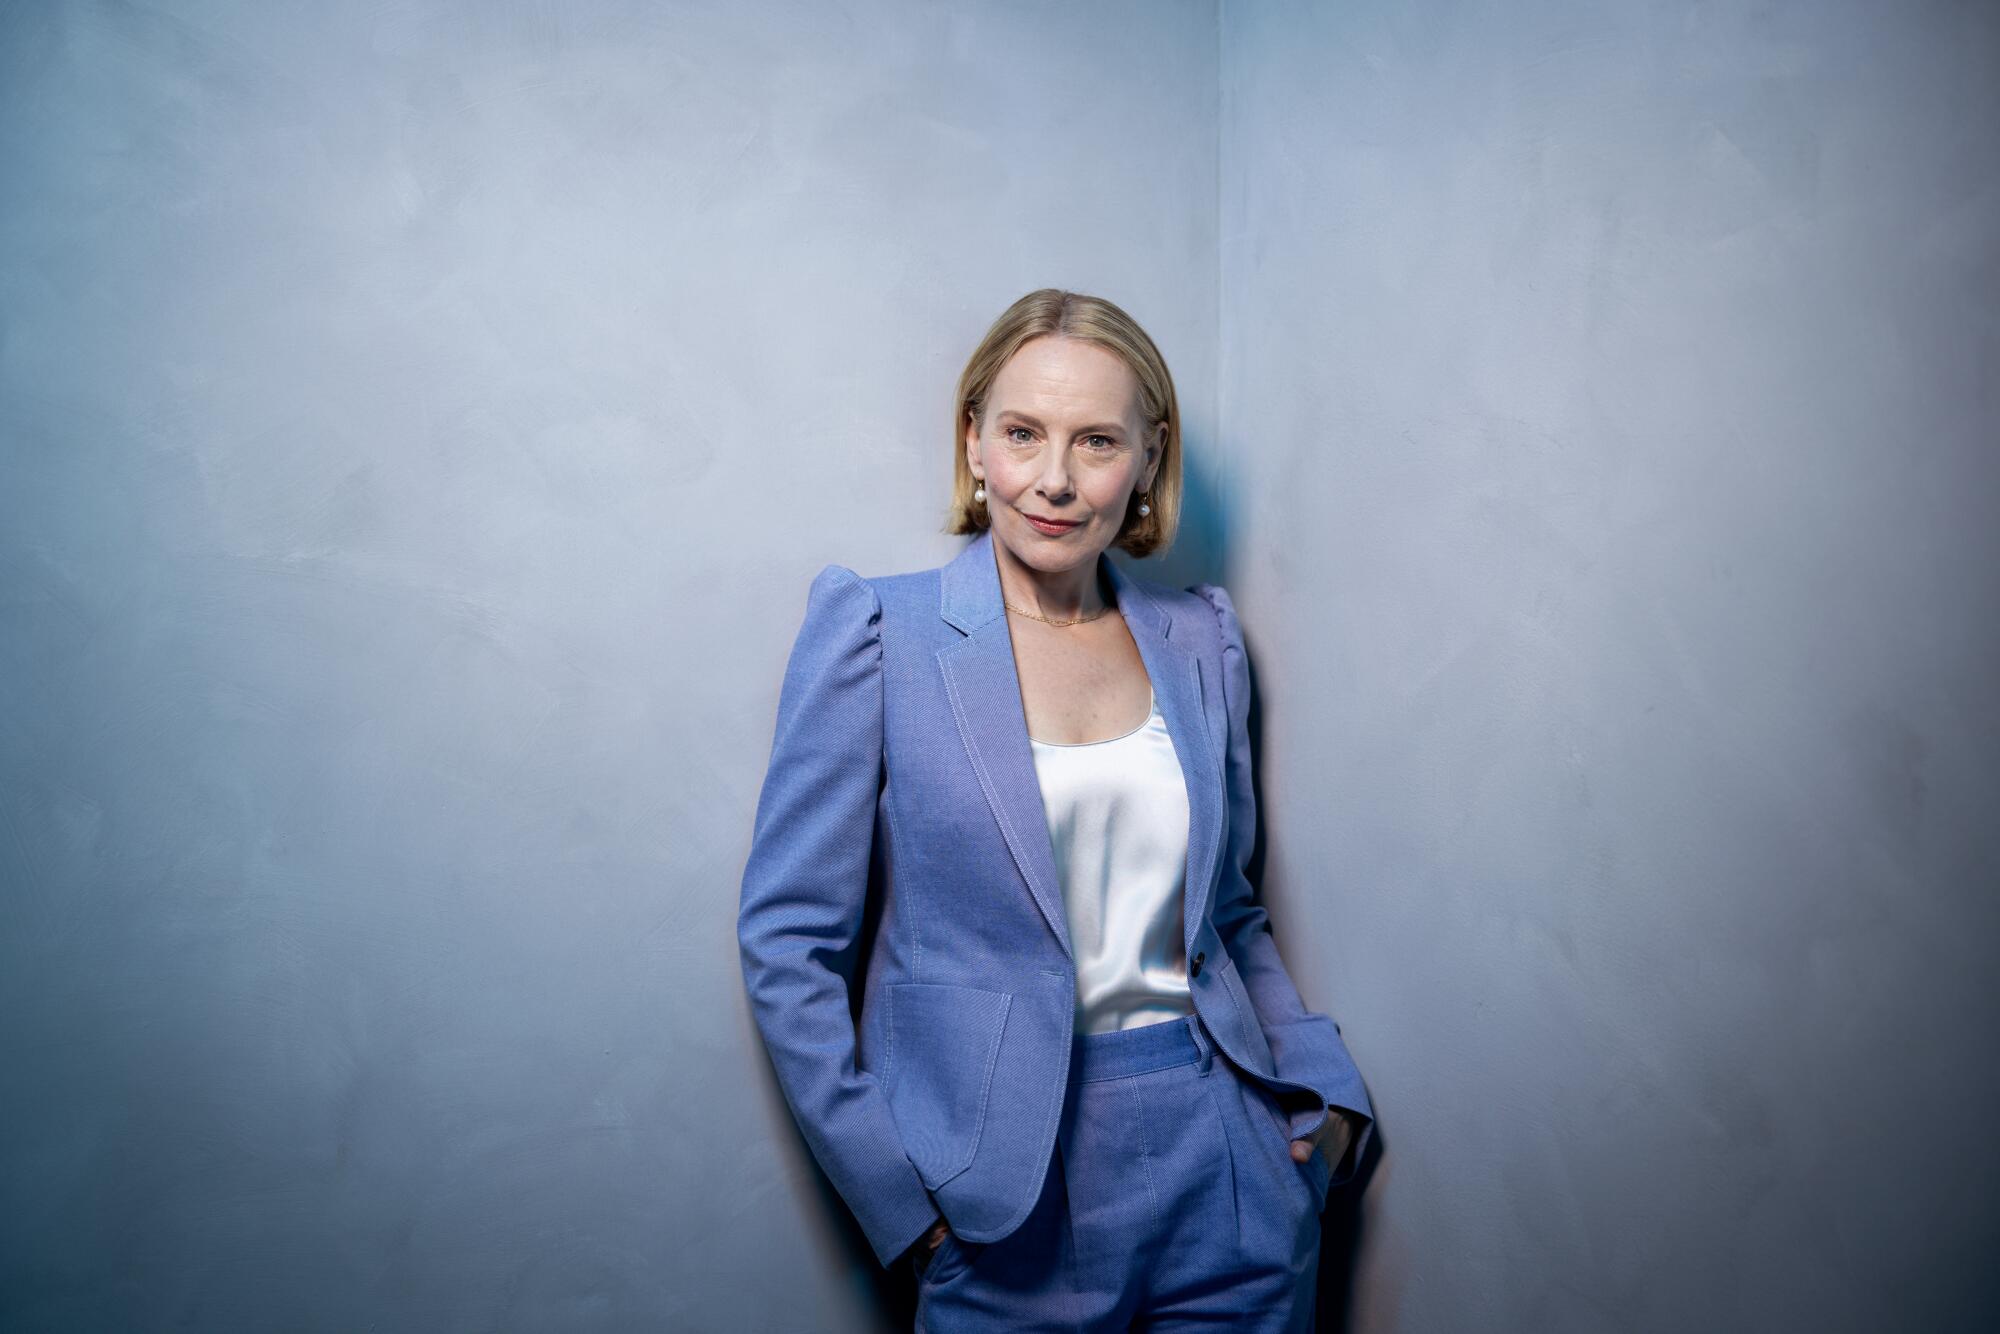 Amy Ryan stands with her hands in the pockets of her pantsuit for a portrait.